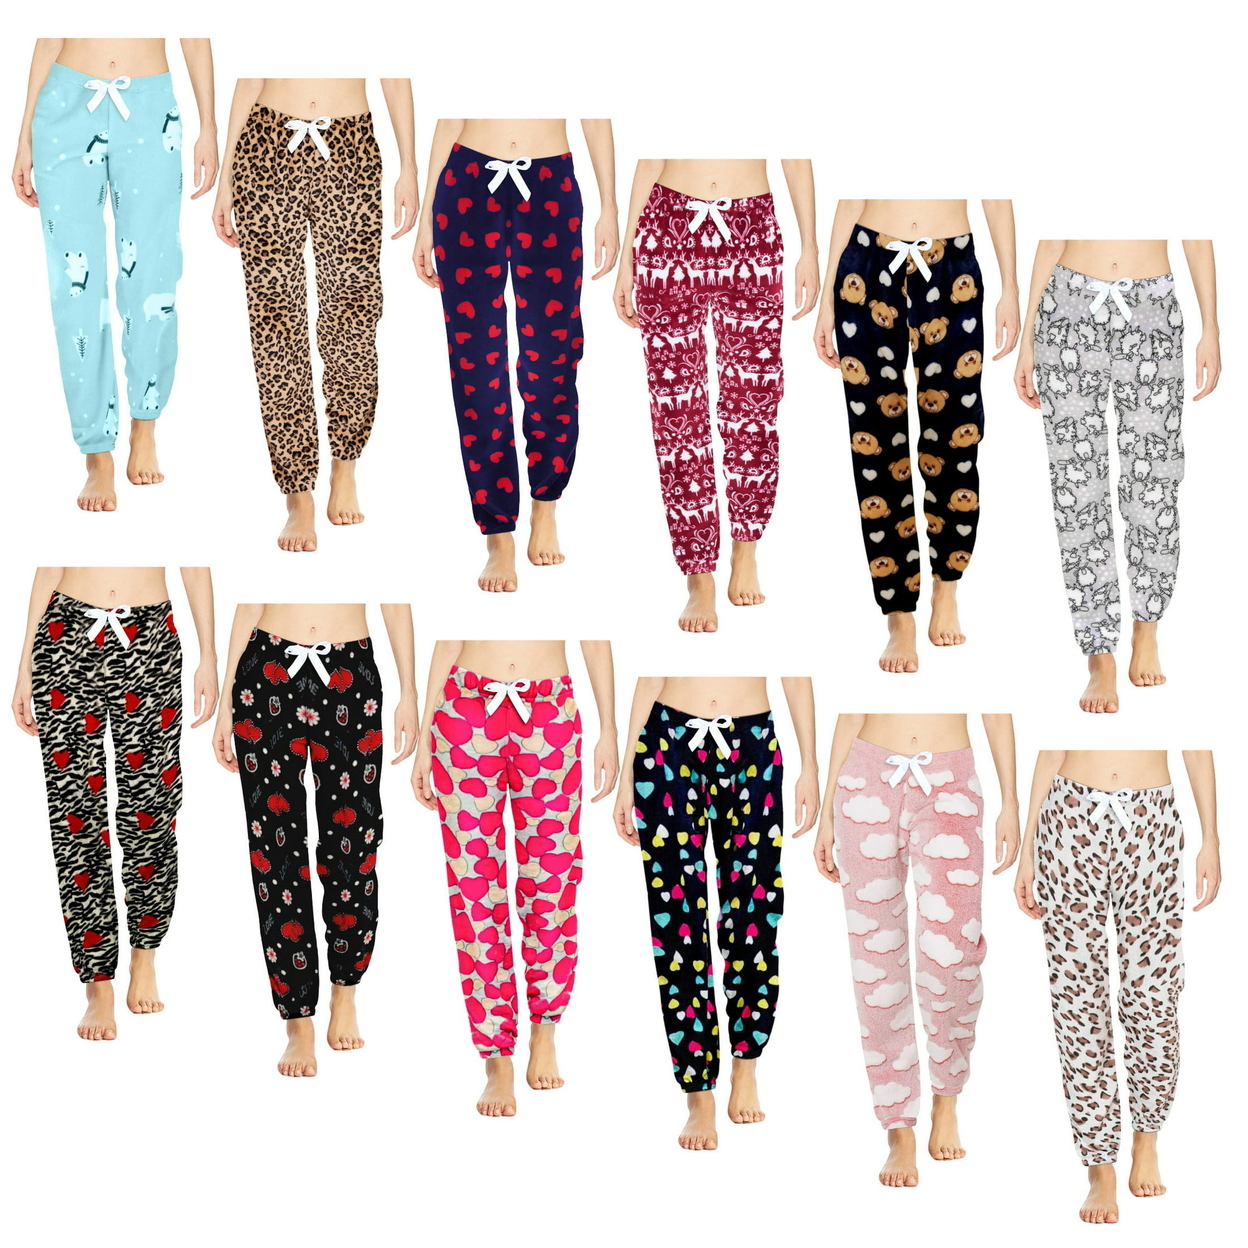 Multi-Pack: Women's Printed Ultra-Soft Comfy Stretch Micro-Fleece Pajama Lounge Pants - 1-pack, Love, X-large